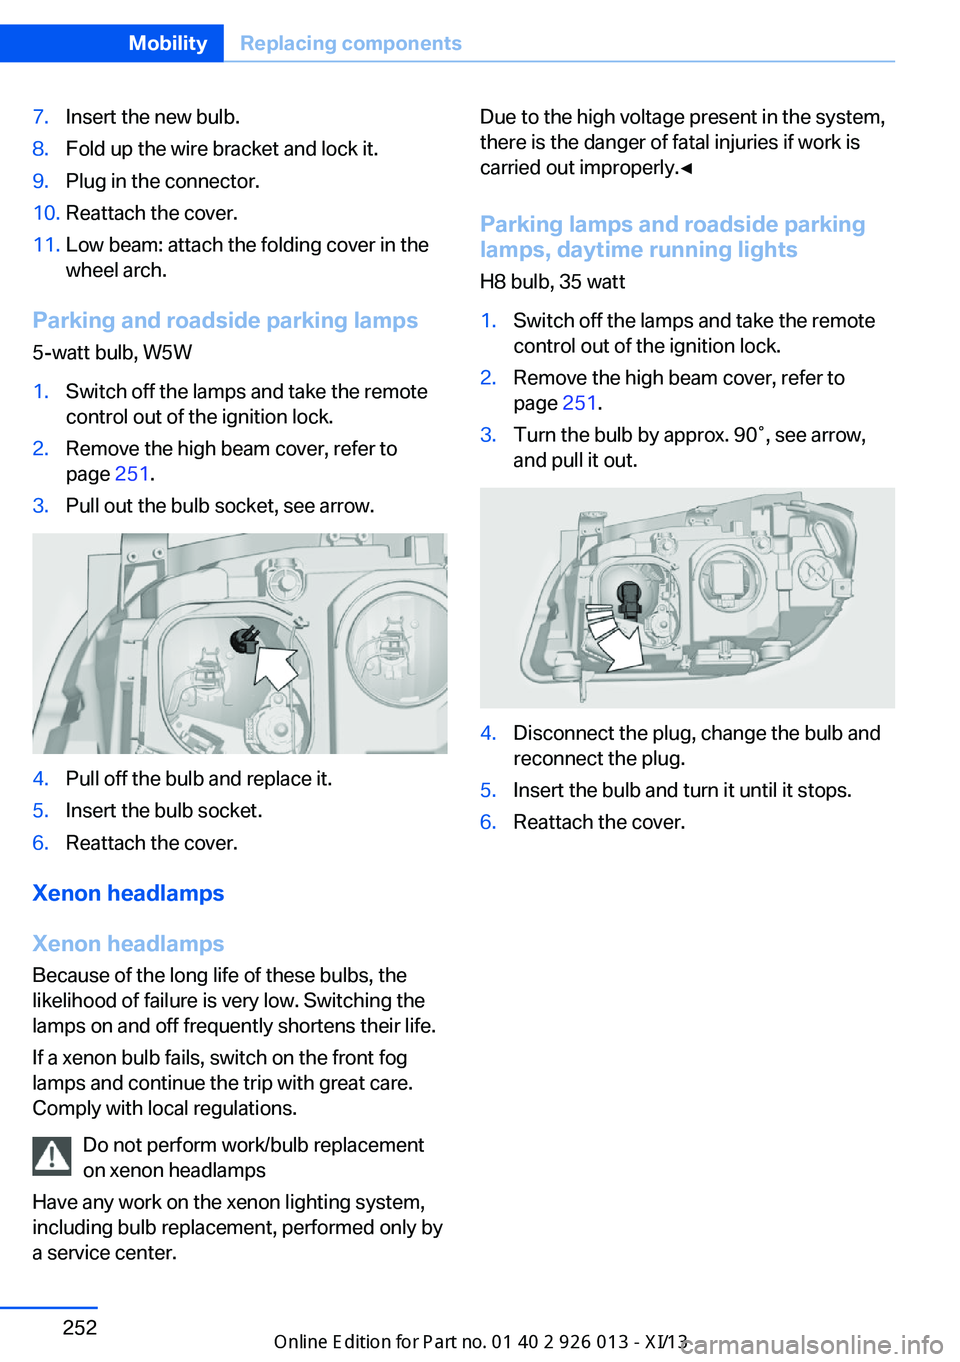 BMW X1 2013 E84 Owners Manual 7.Insert the new bulb.8.Fold up the wire bracket and lock it.9.Plug in the connector.10.Reattach the cover.11.Low beam: attach the folding cover in the
wheel arch.
Parking and roadside parking lamps
5